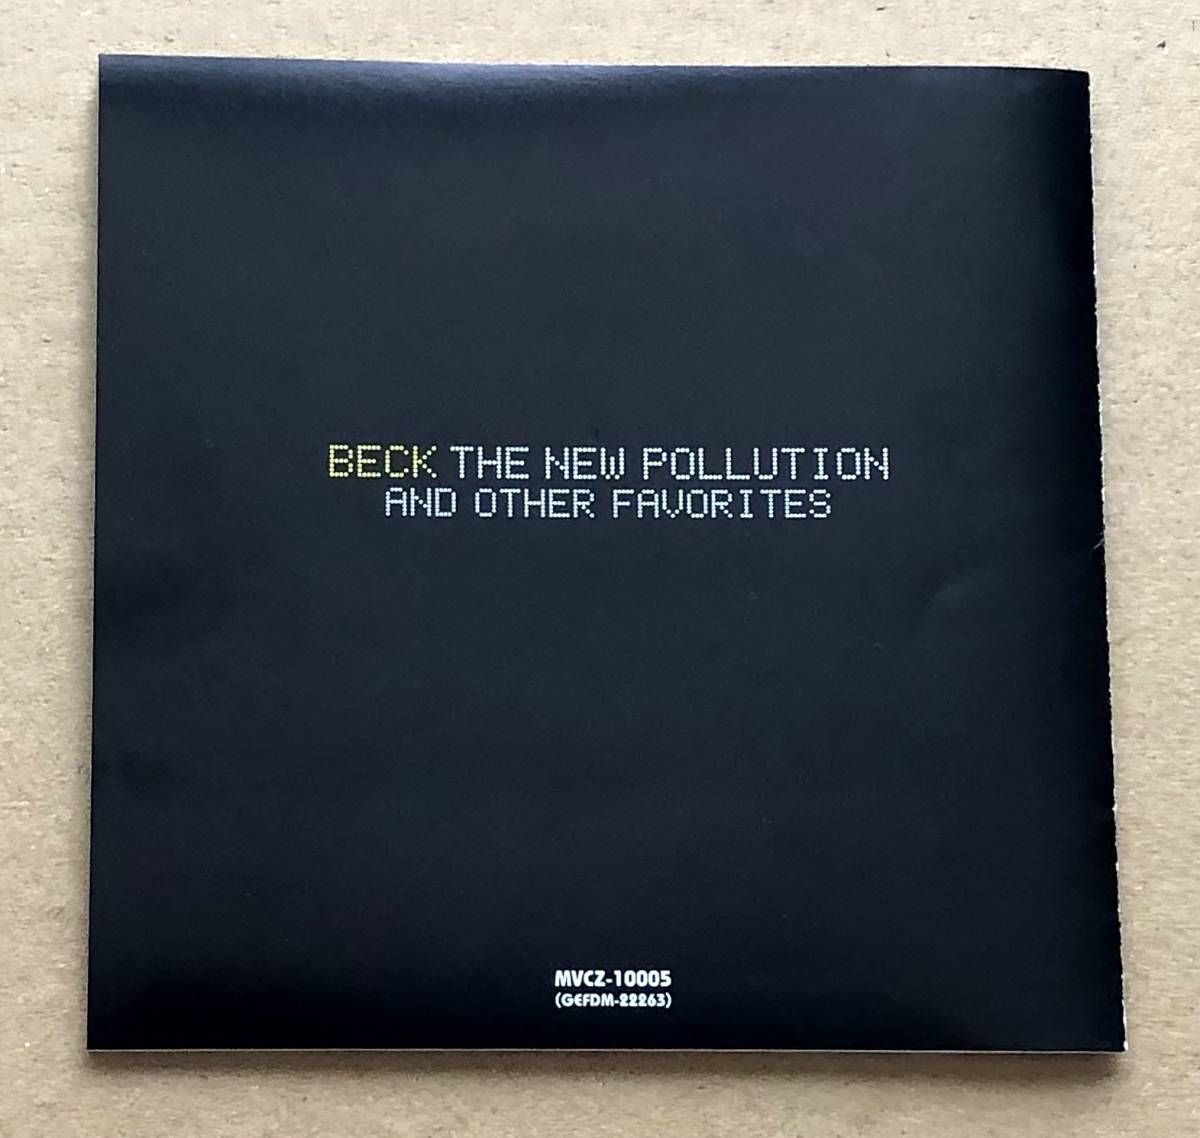 [CD] Beck（ベック）/ "THE NEW POLLUTION" AND OTHER FAVORITES 日本企画盤 / 限定版 帯付　国内盤_画像6